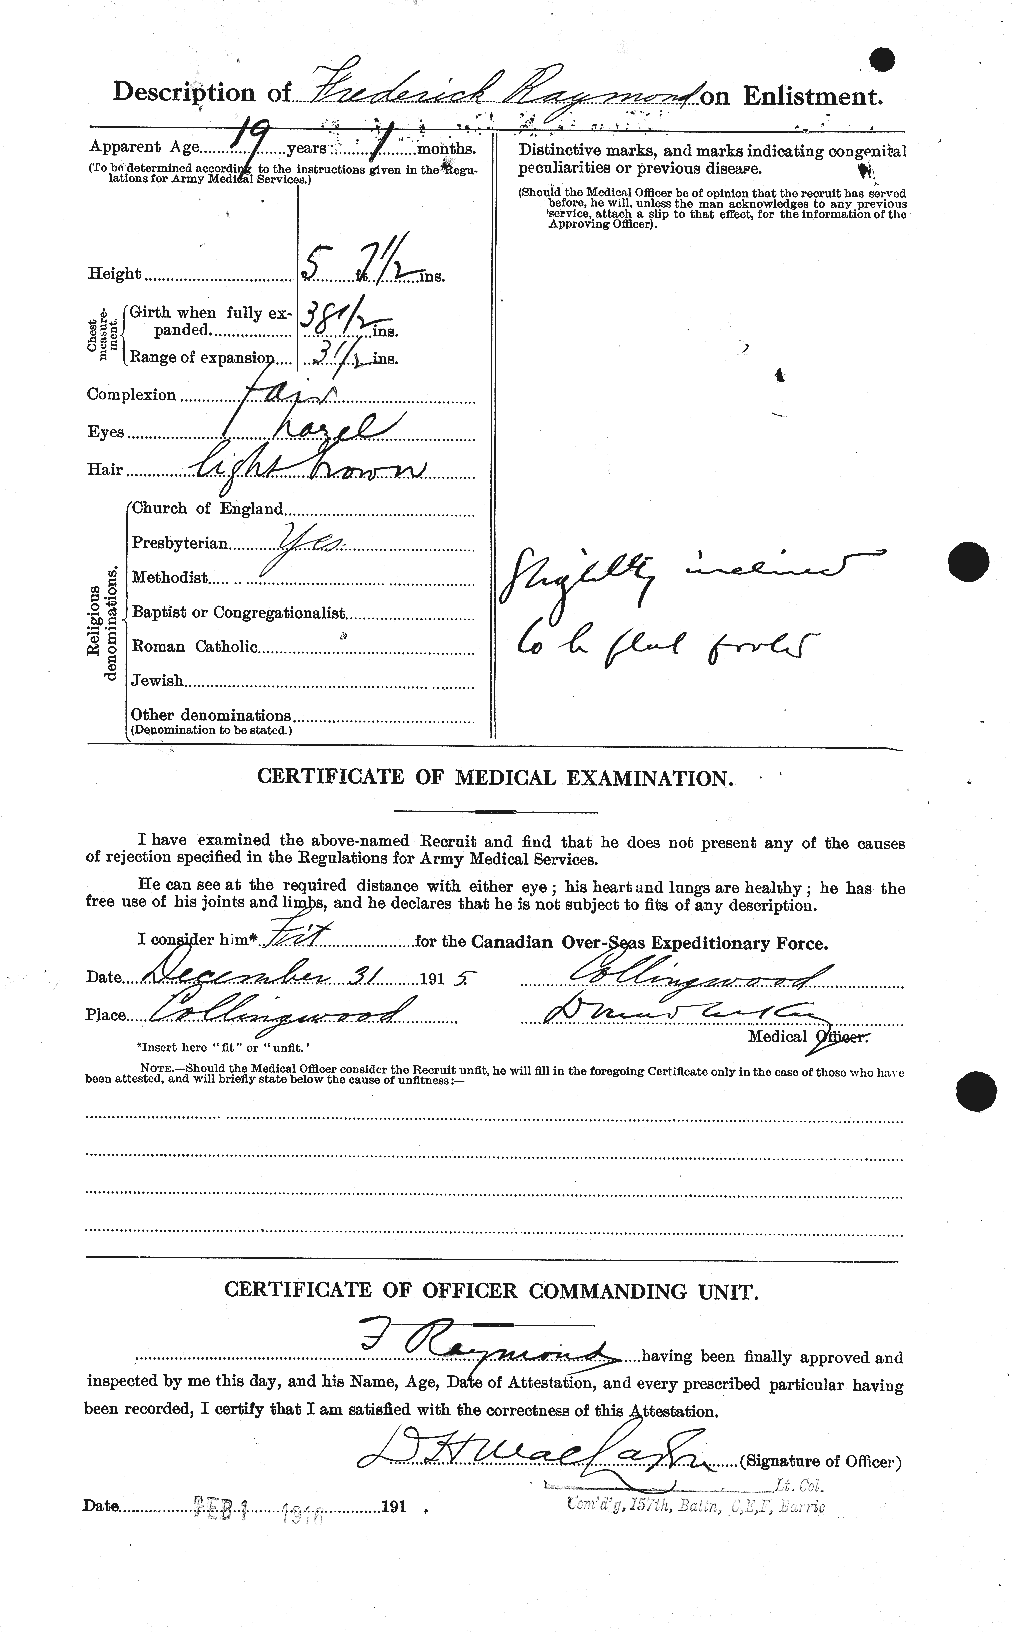 Personnel Records of the First World War - CEF 595335b